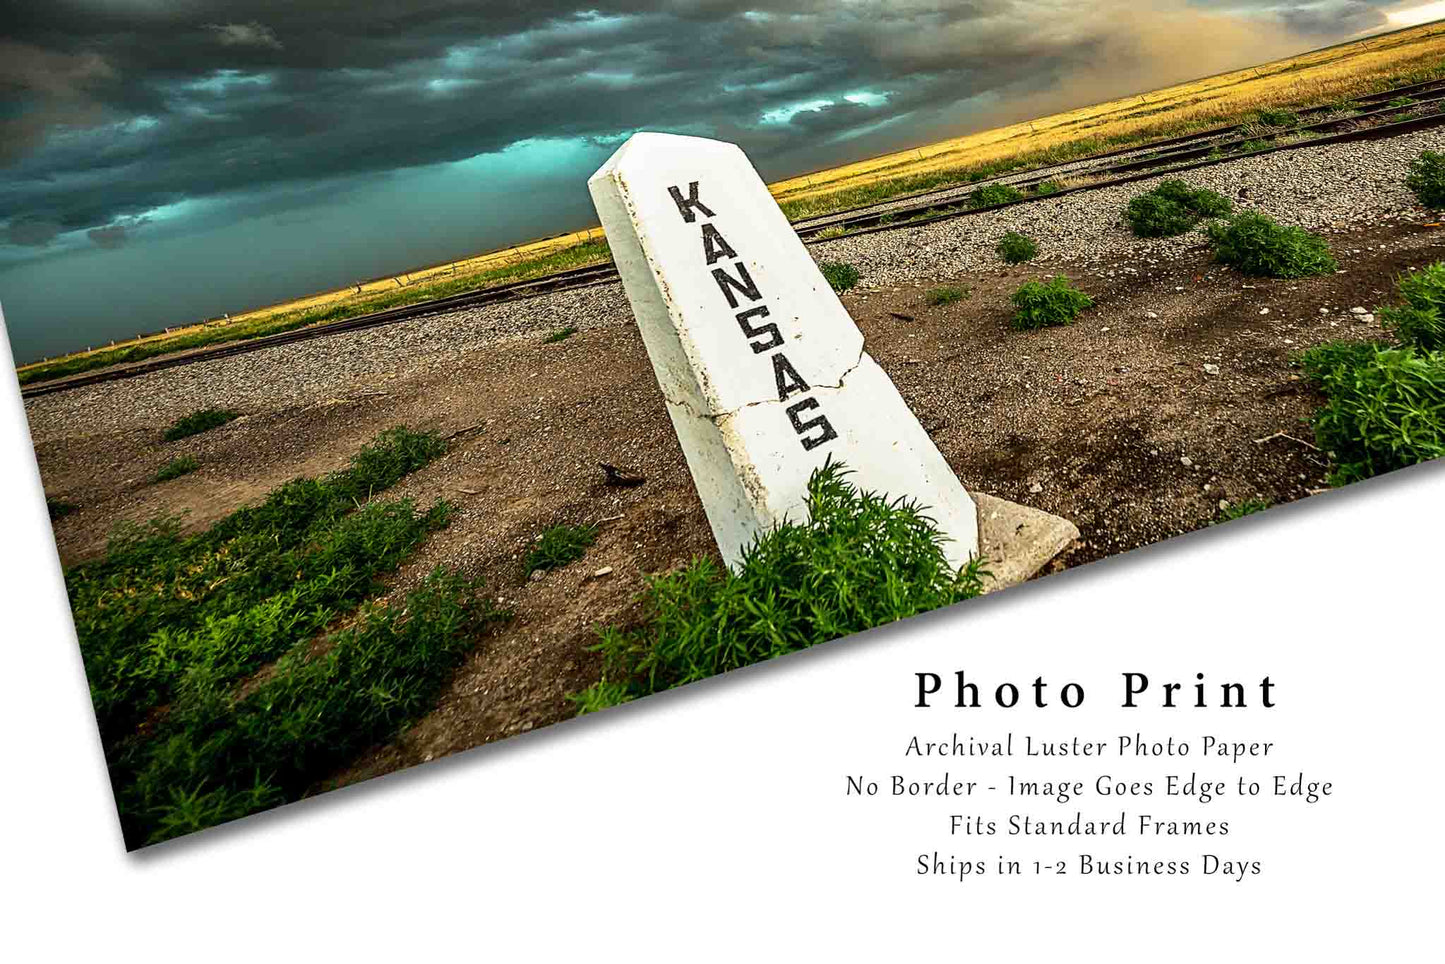 Great Plains Photography Print (Not Framed) Picture of Thunderstorm Advancing Past Railroad Post Along Kansas and Colorado State Line Storm Wall Art Western Decor